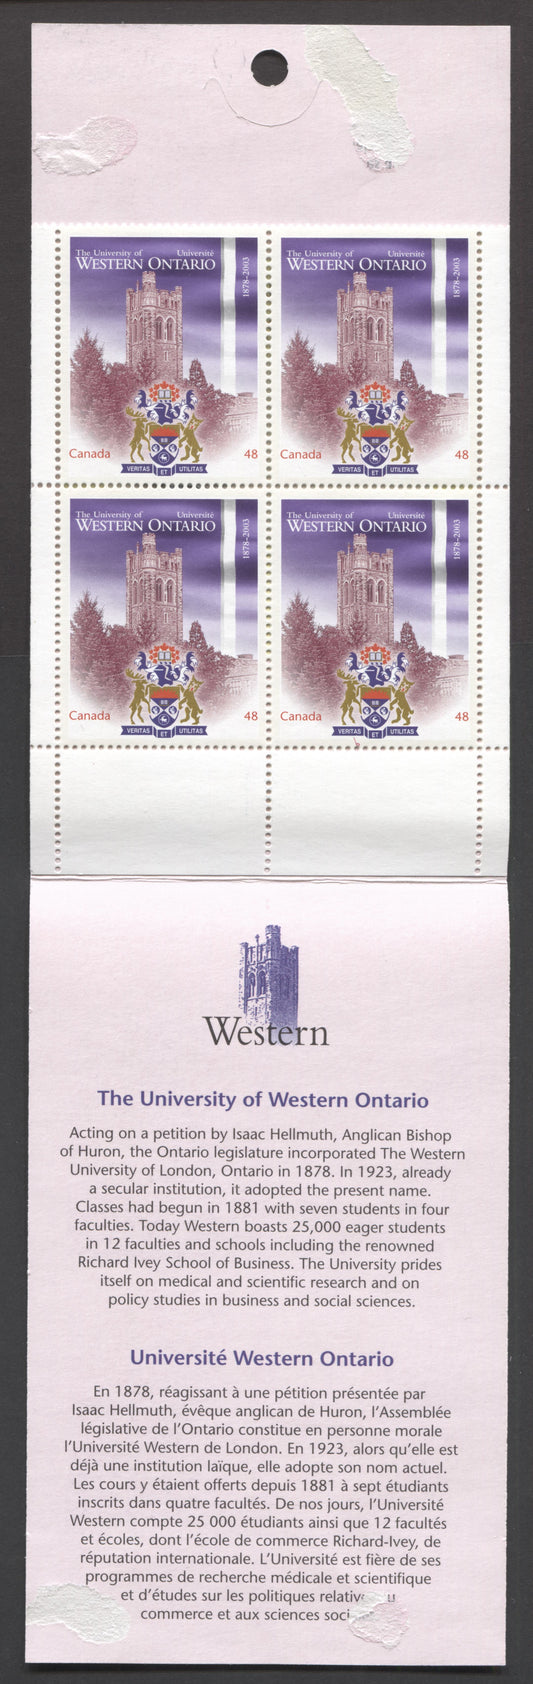 Canada #BK268a-b 2003 University of Western Ontario Issue, Complete $3.84 Booklet, Tullis Russell Coatings Paper, Dead Paper, 4 mm GT-4 Tagging